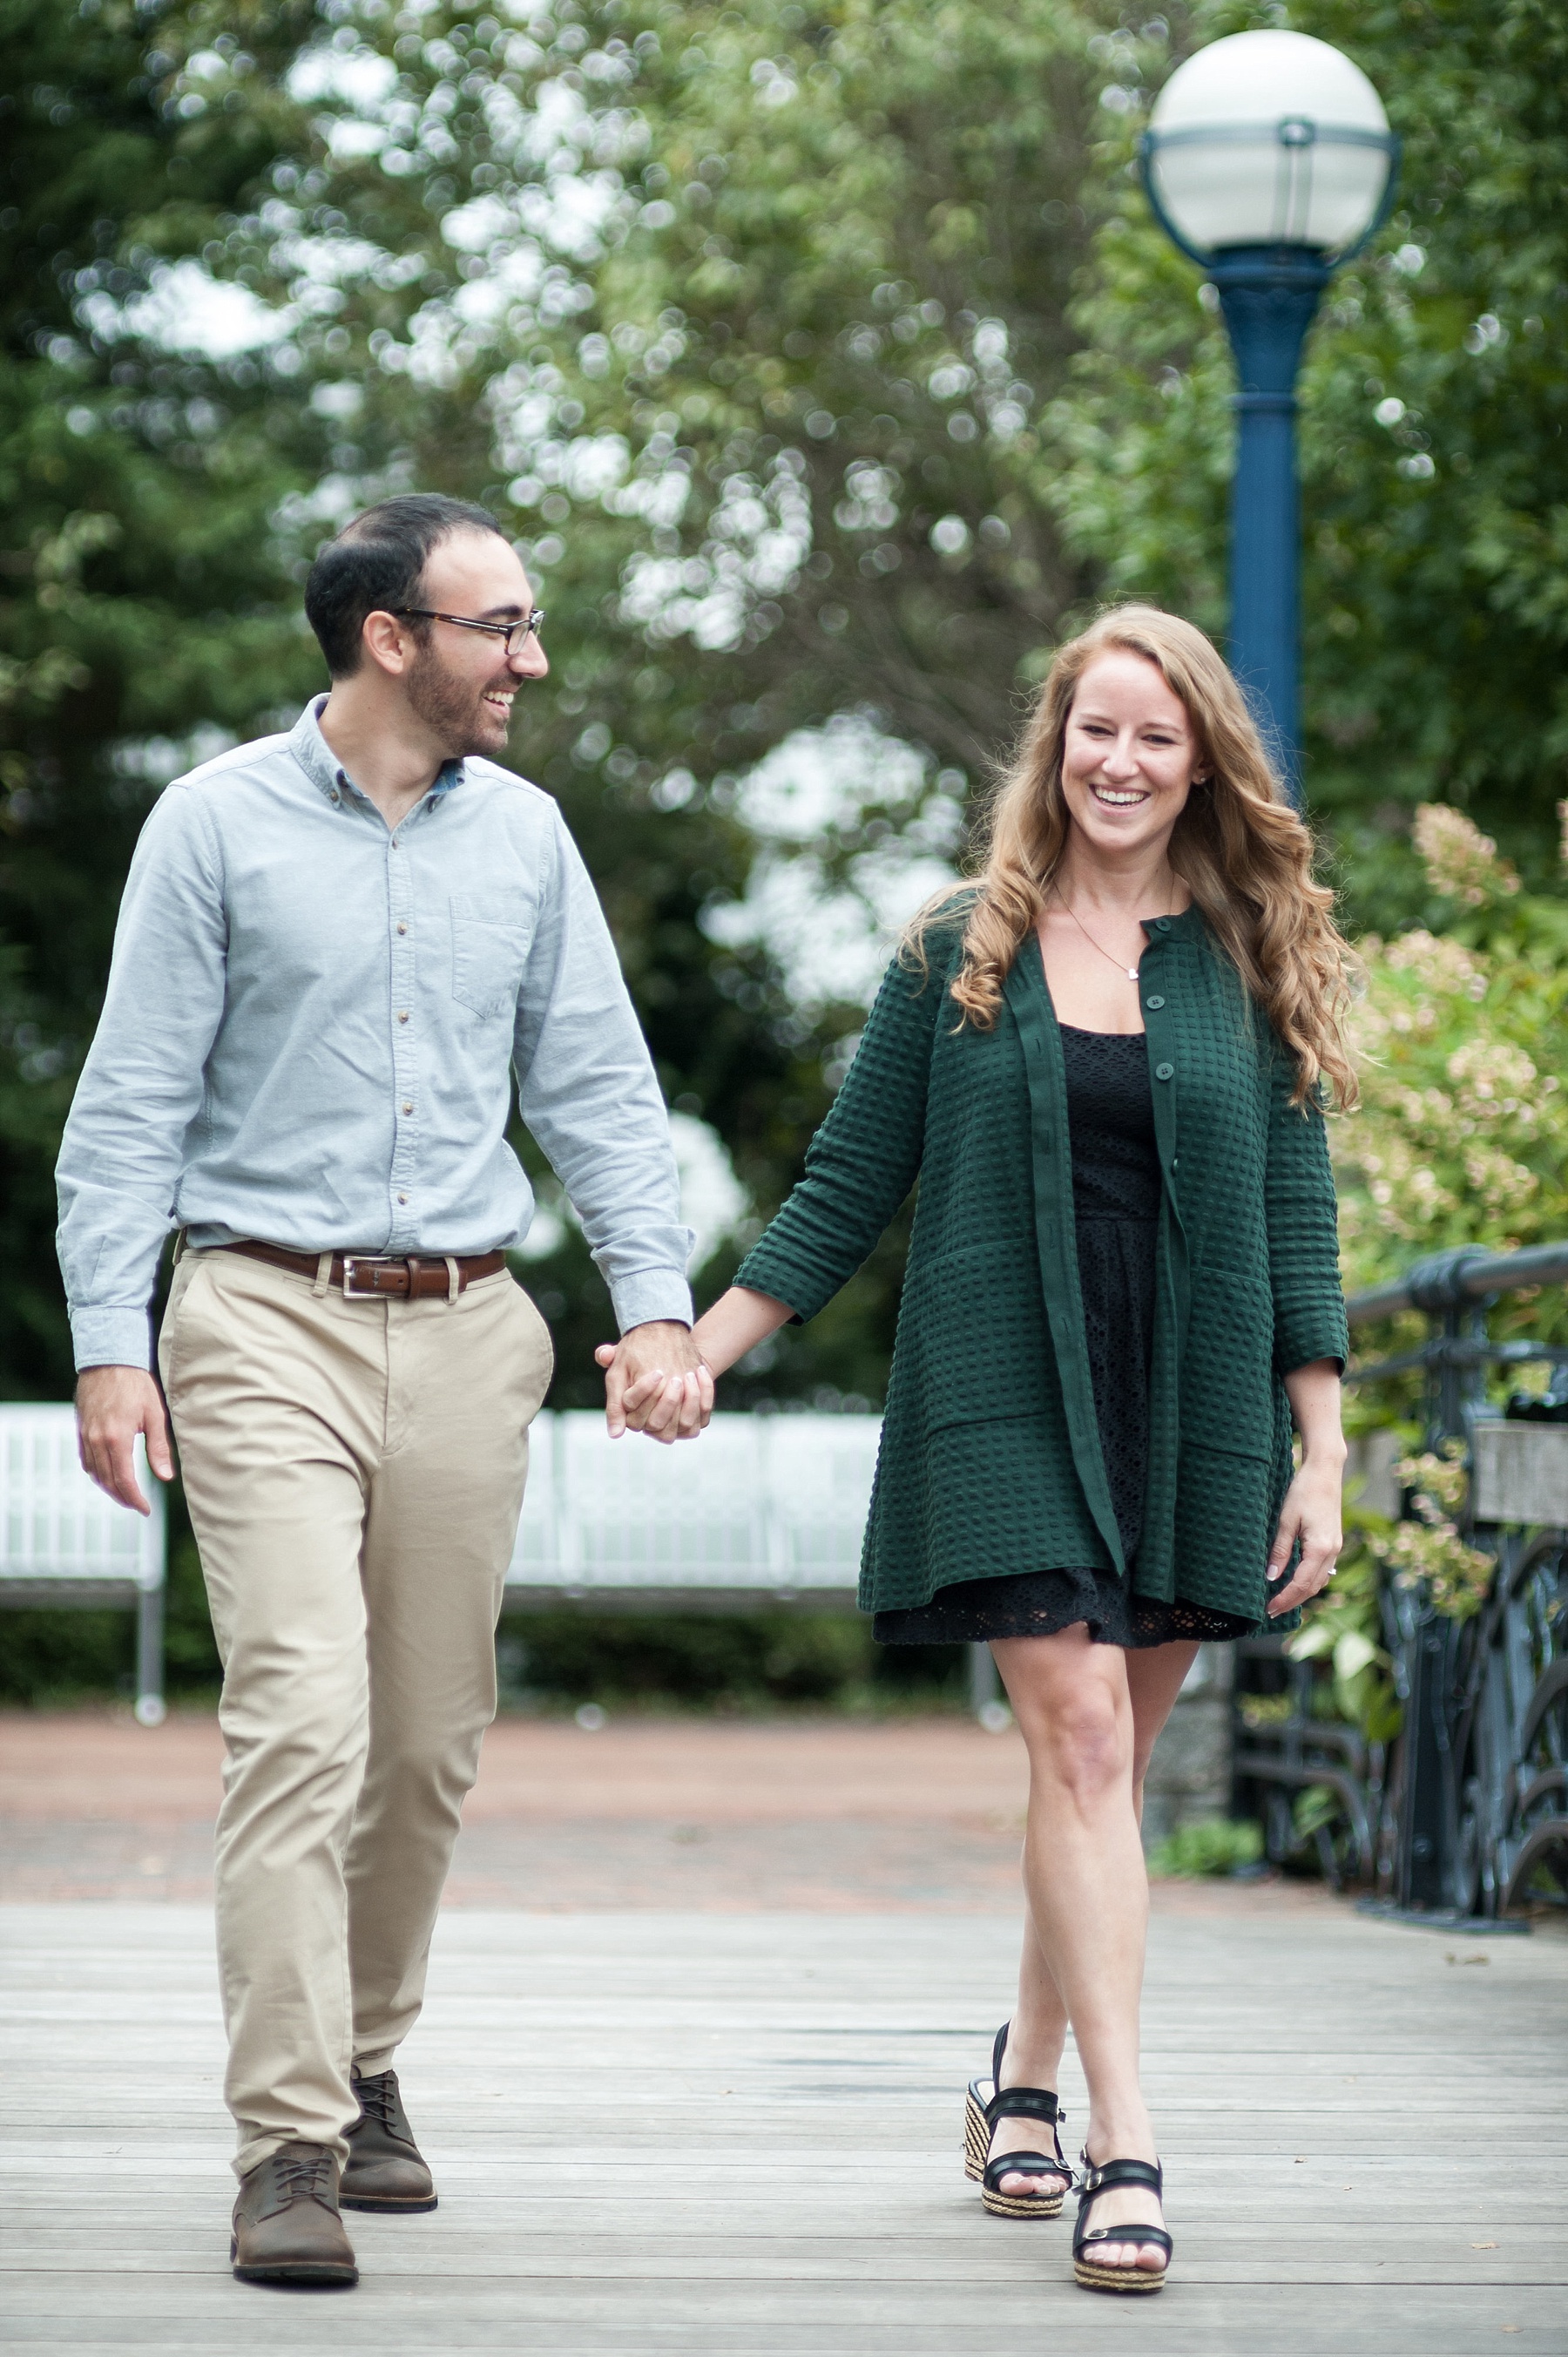 Wendy Zook Photography | Frederick MD engagement session | Frederick MD wedding photographer | Frederick wedding photographer, Maryland wedding photographer, engagement session, Frederick engagement session, engagement session in Frederick